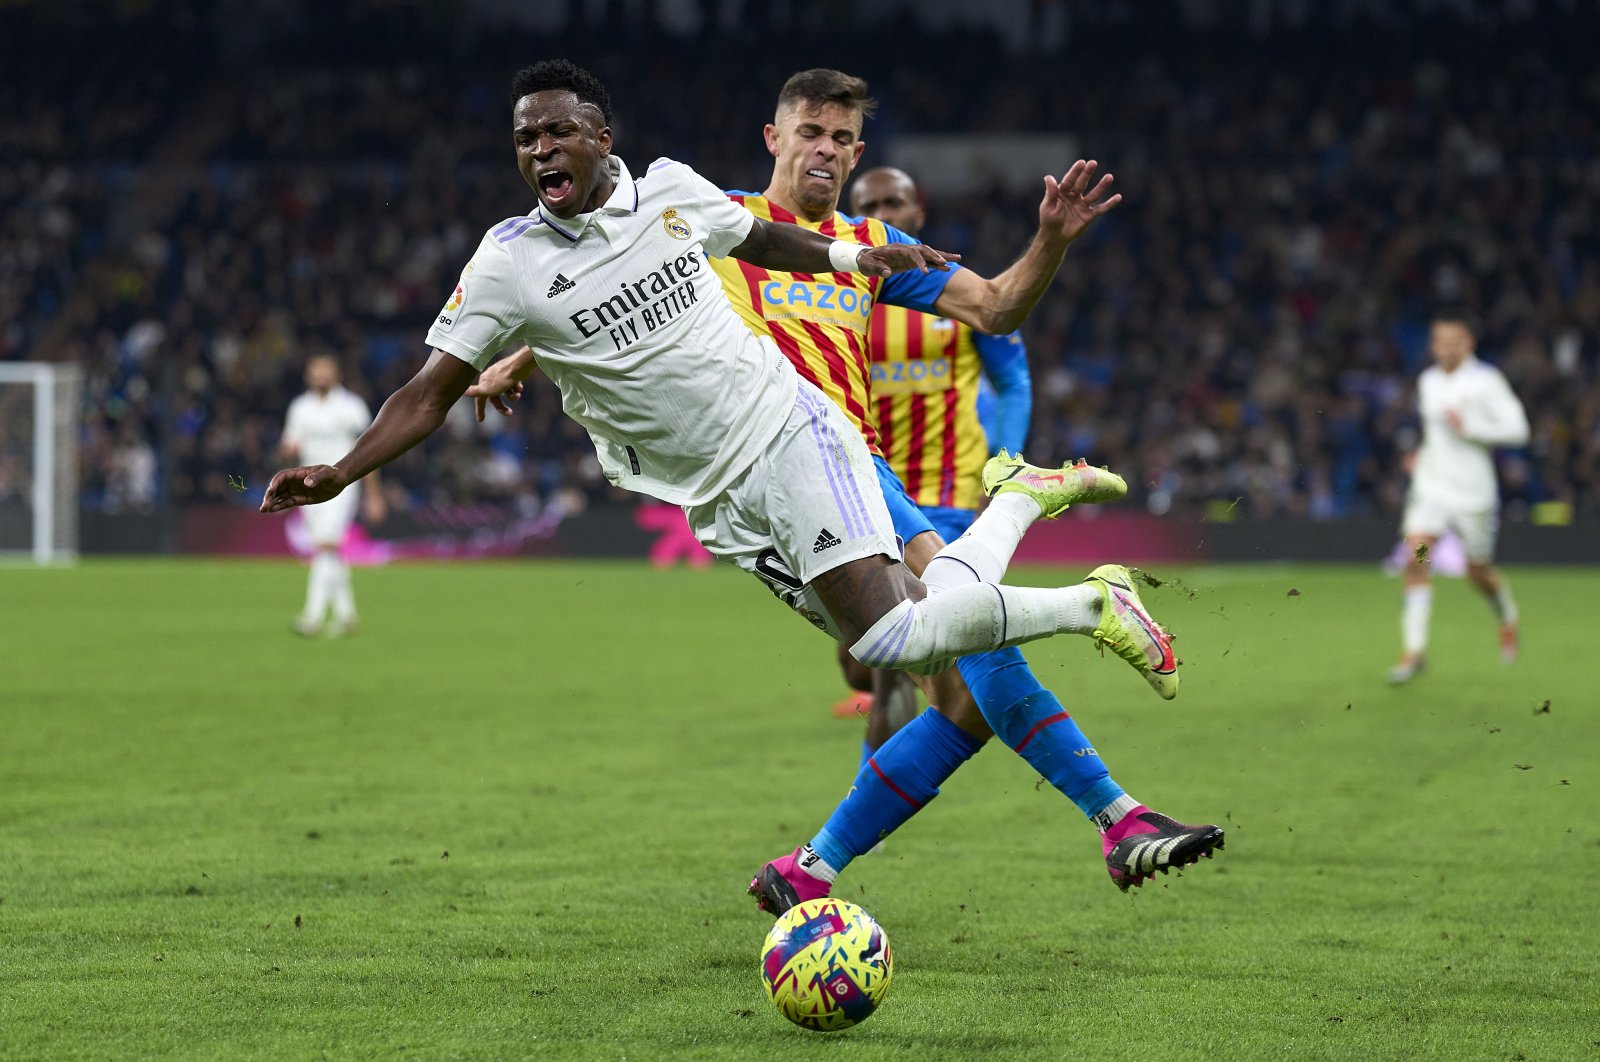 Real Madrid&#039;s Vinicius Junior (L) is tackled by Gabriel Paulista (R) of Valencia CF during the LaLiga Santander match at the Estadio Santiago Bernabeu, Madrid, Spain, Feb. 2, 2023. (Getty Images Photo)